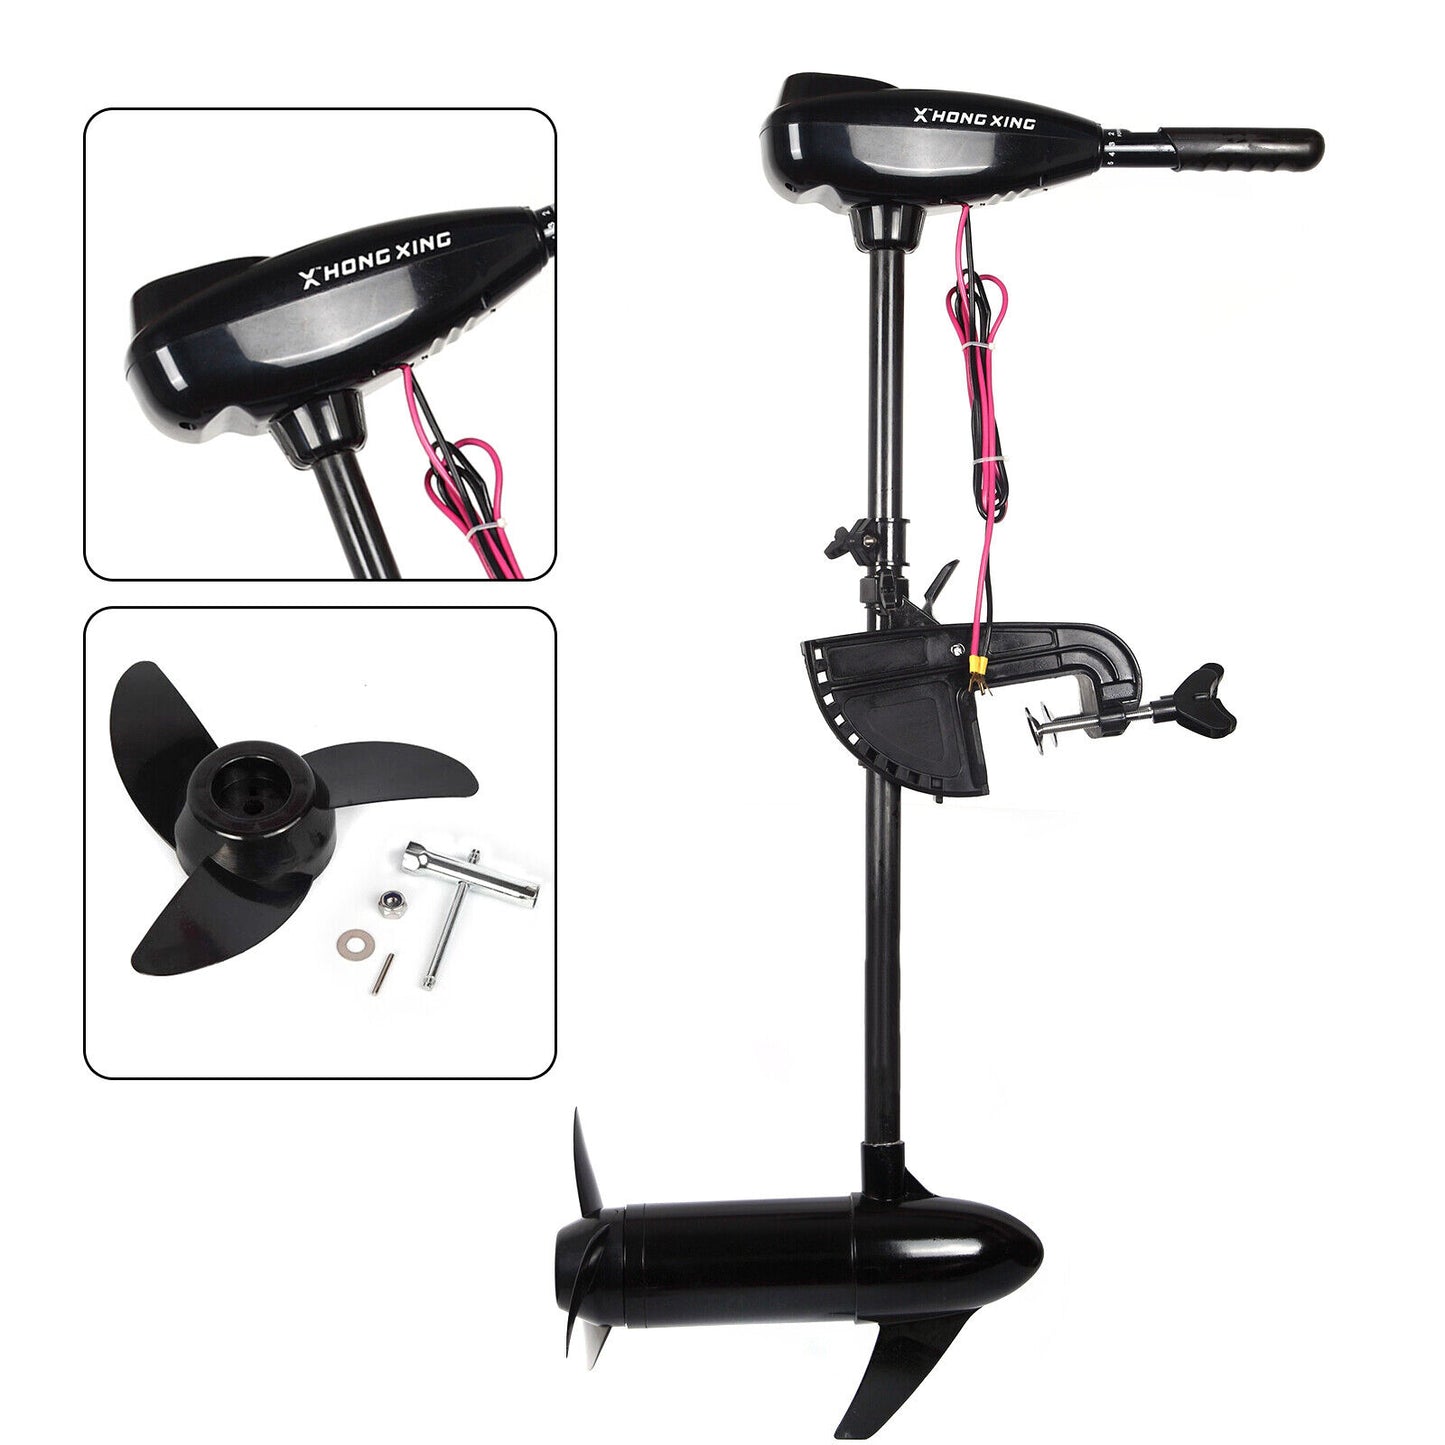 26lbs-86lbs Electric Outboard Motor with Brush and Max Thrust, Engine trolling Motor for Outdoor Fishing Boat, Small Electric Propellers